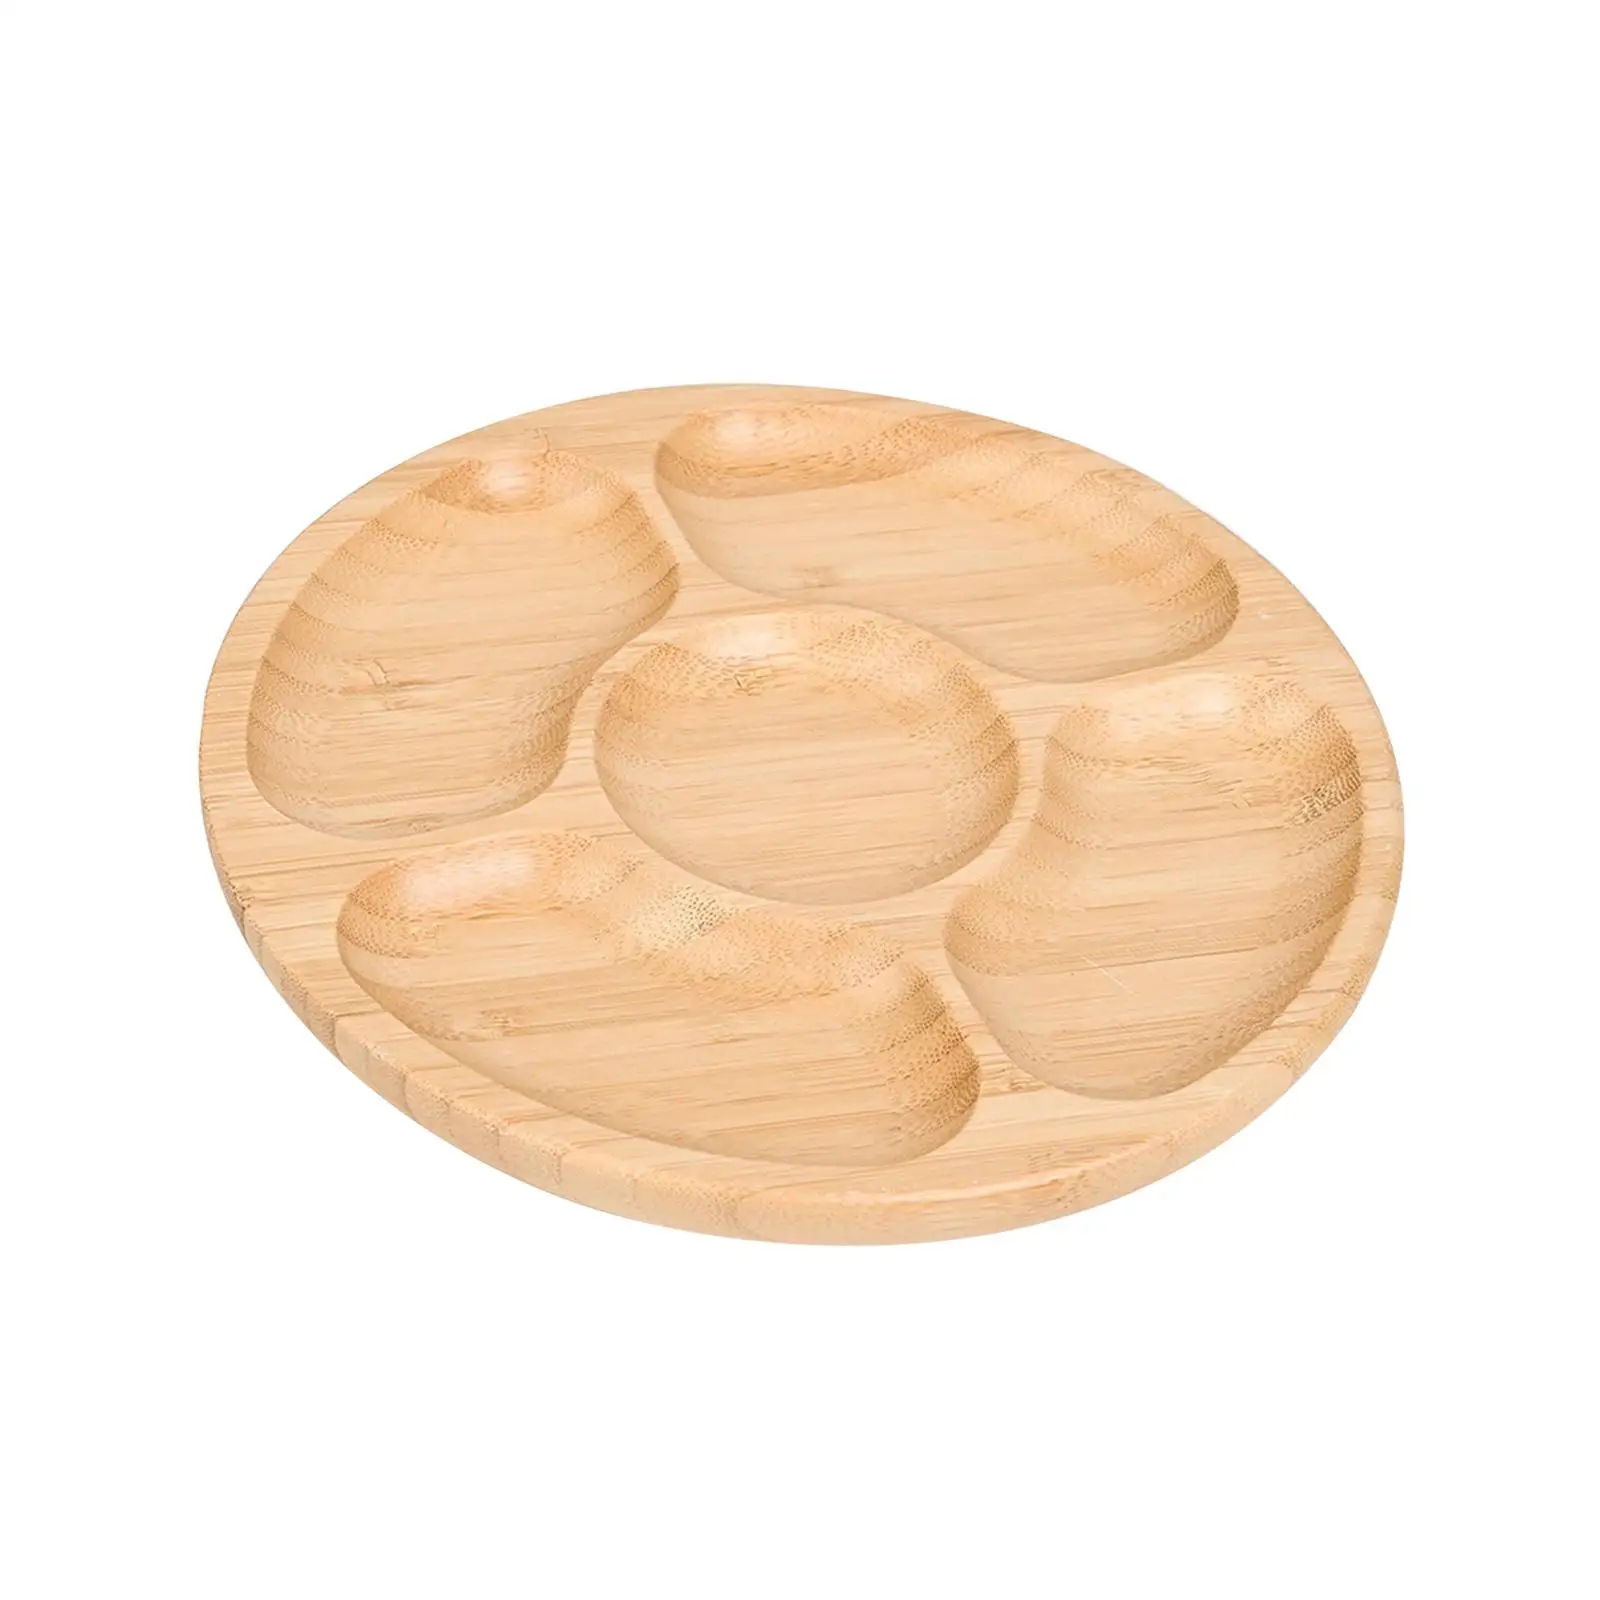 Wooden Tray Round Tray Wooden Food Tray Fruit Plate for Cheese Bread Pastry Party